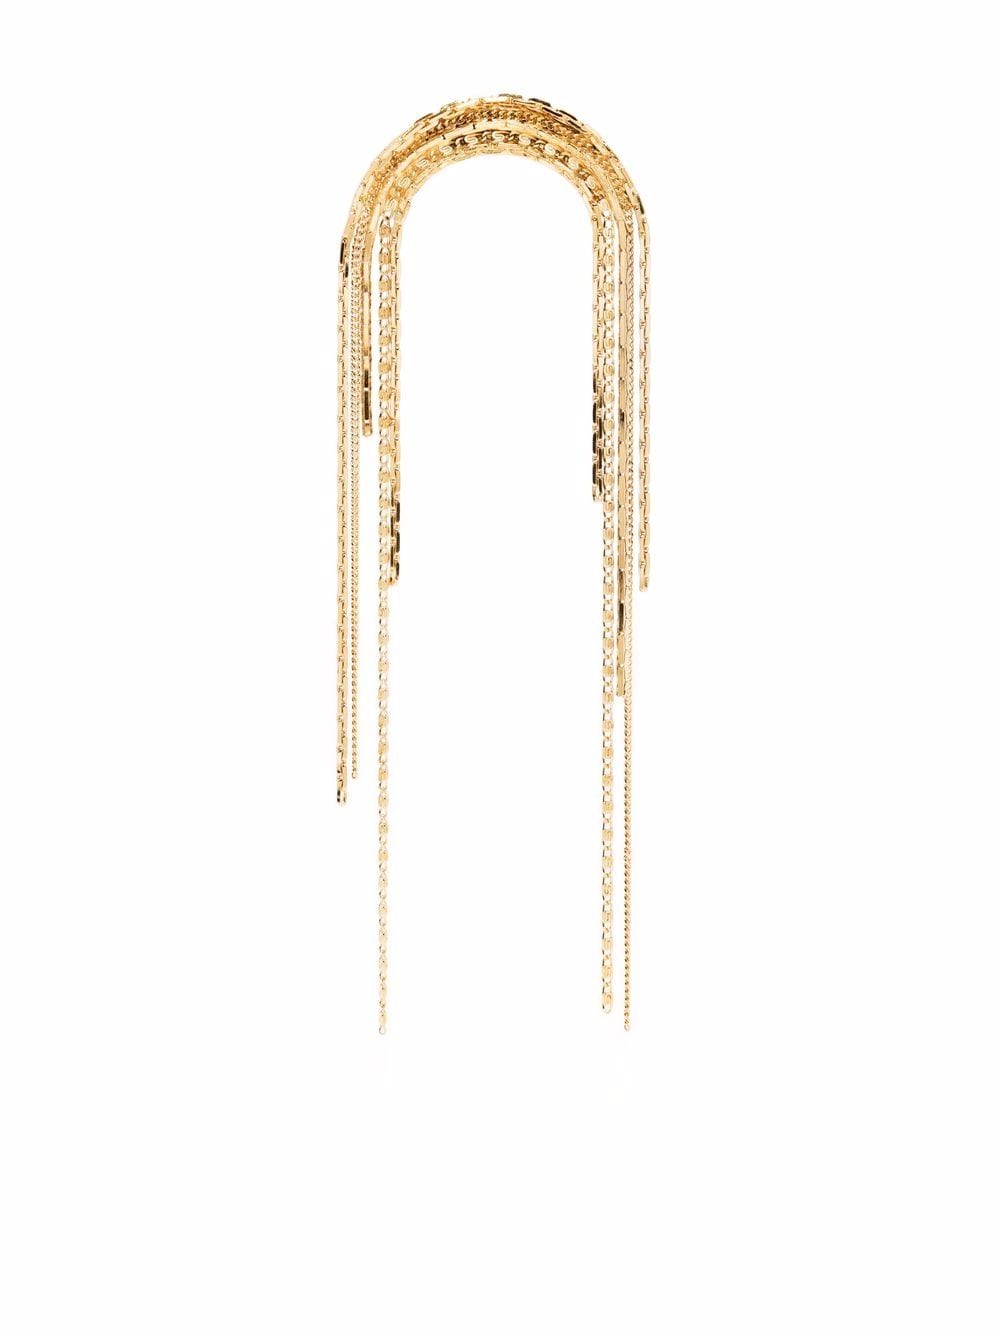 Wouters & Hendrix Serpentine falling chains earring - Gold von Wouters & Hendrix